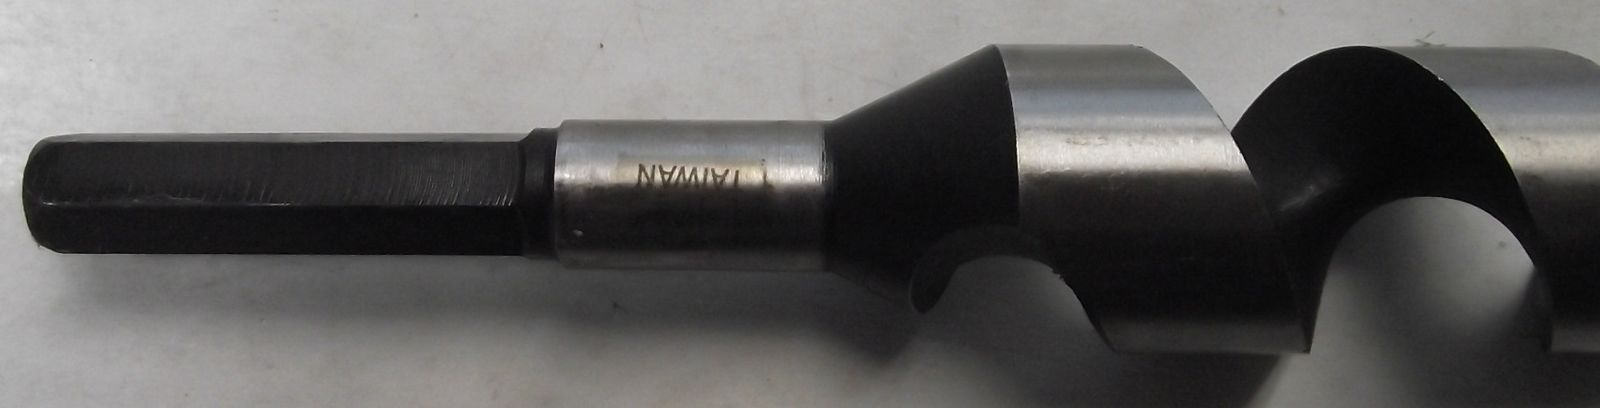 Magna 47533 1-1/4" x 18" Auger Bit For Nail Embedded Wood